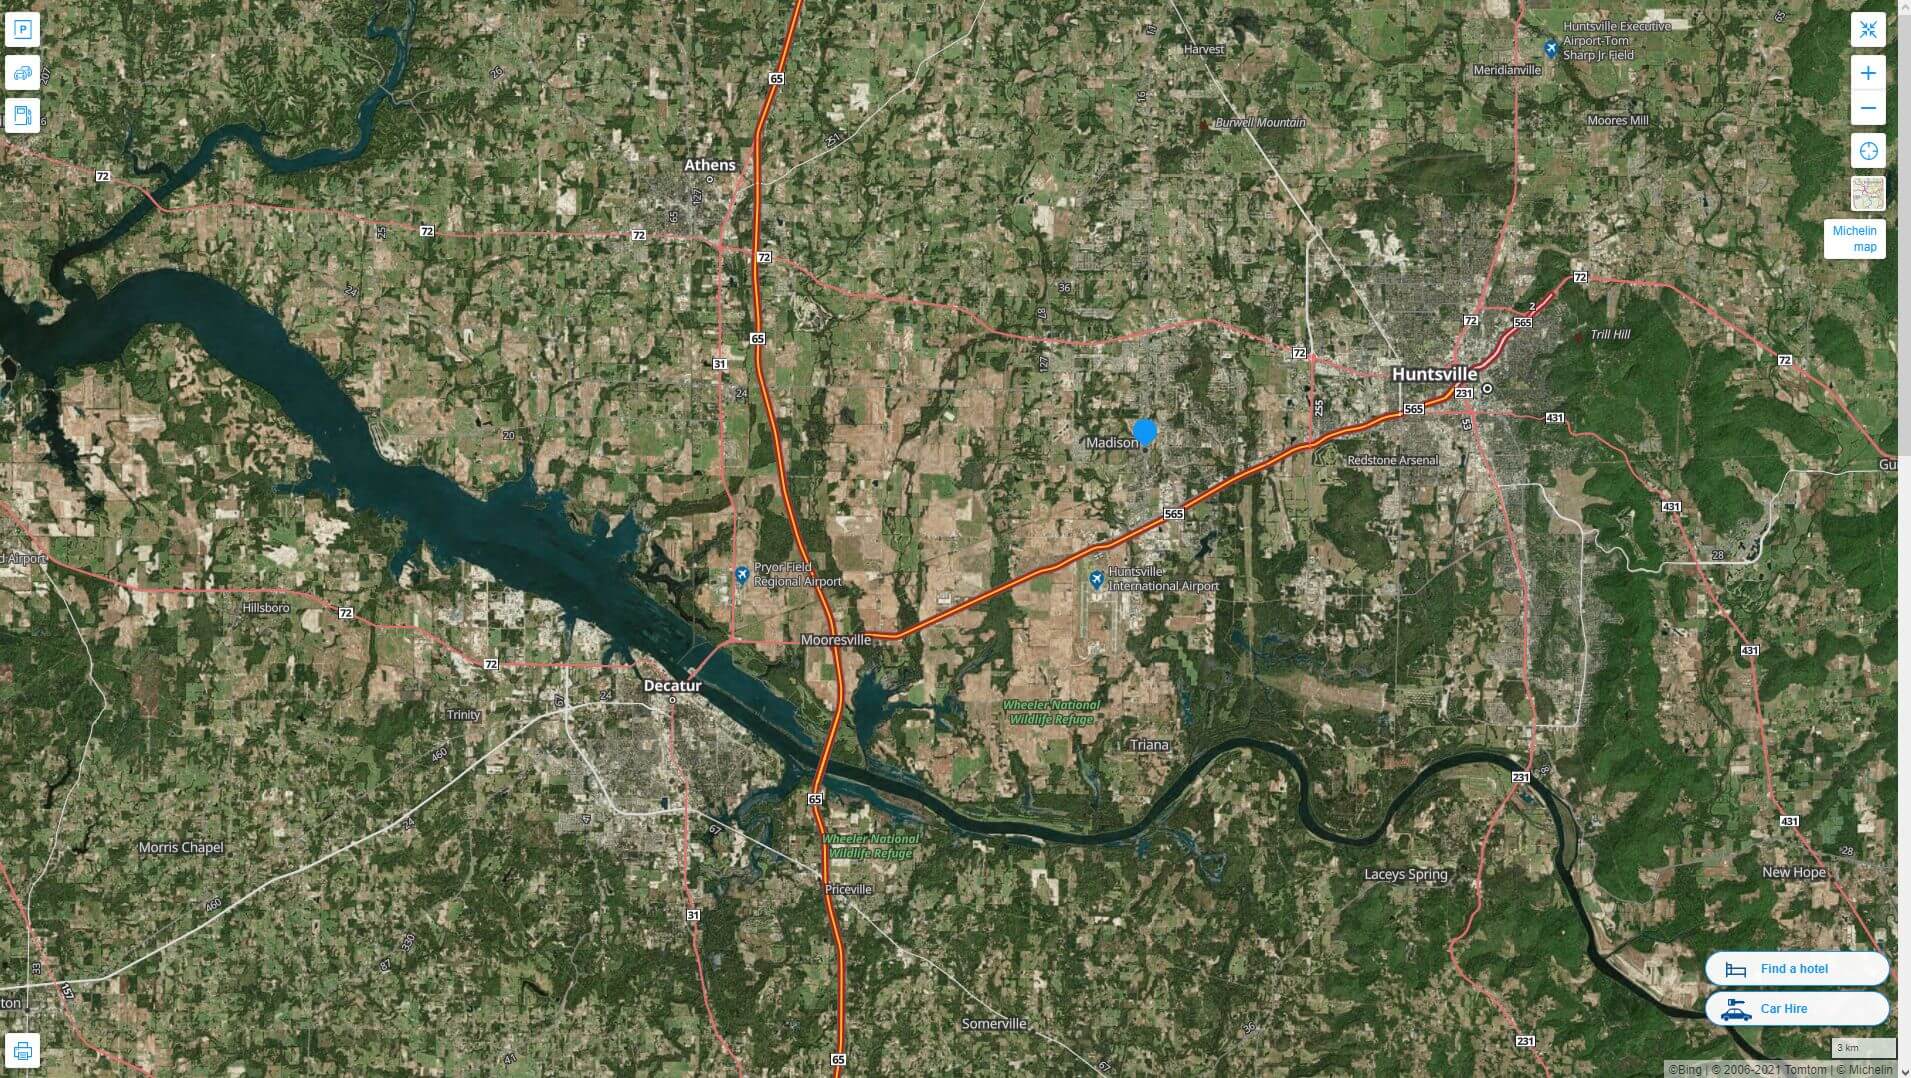 Madison Alabama Highway and Road Map with Satellite View